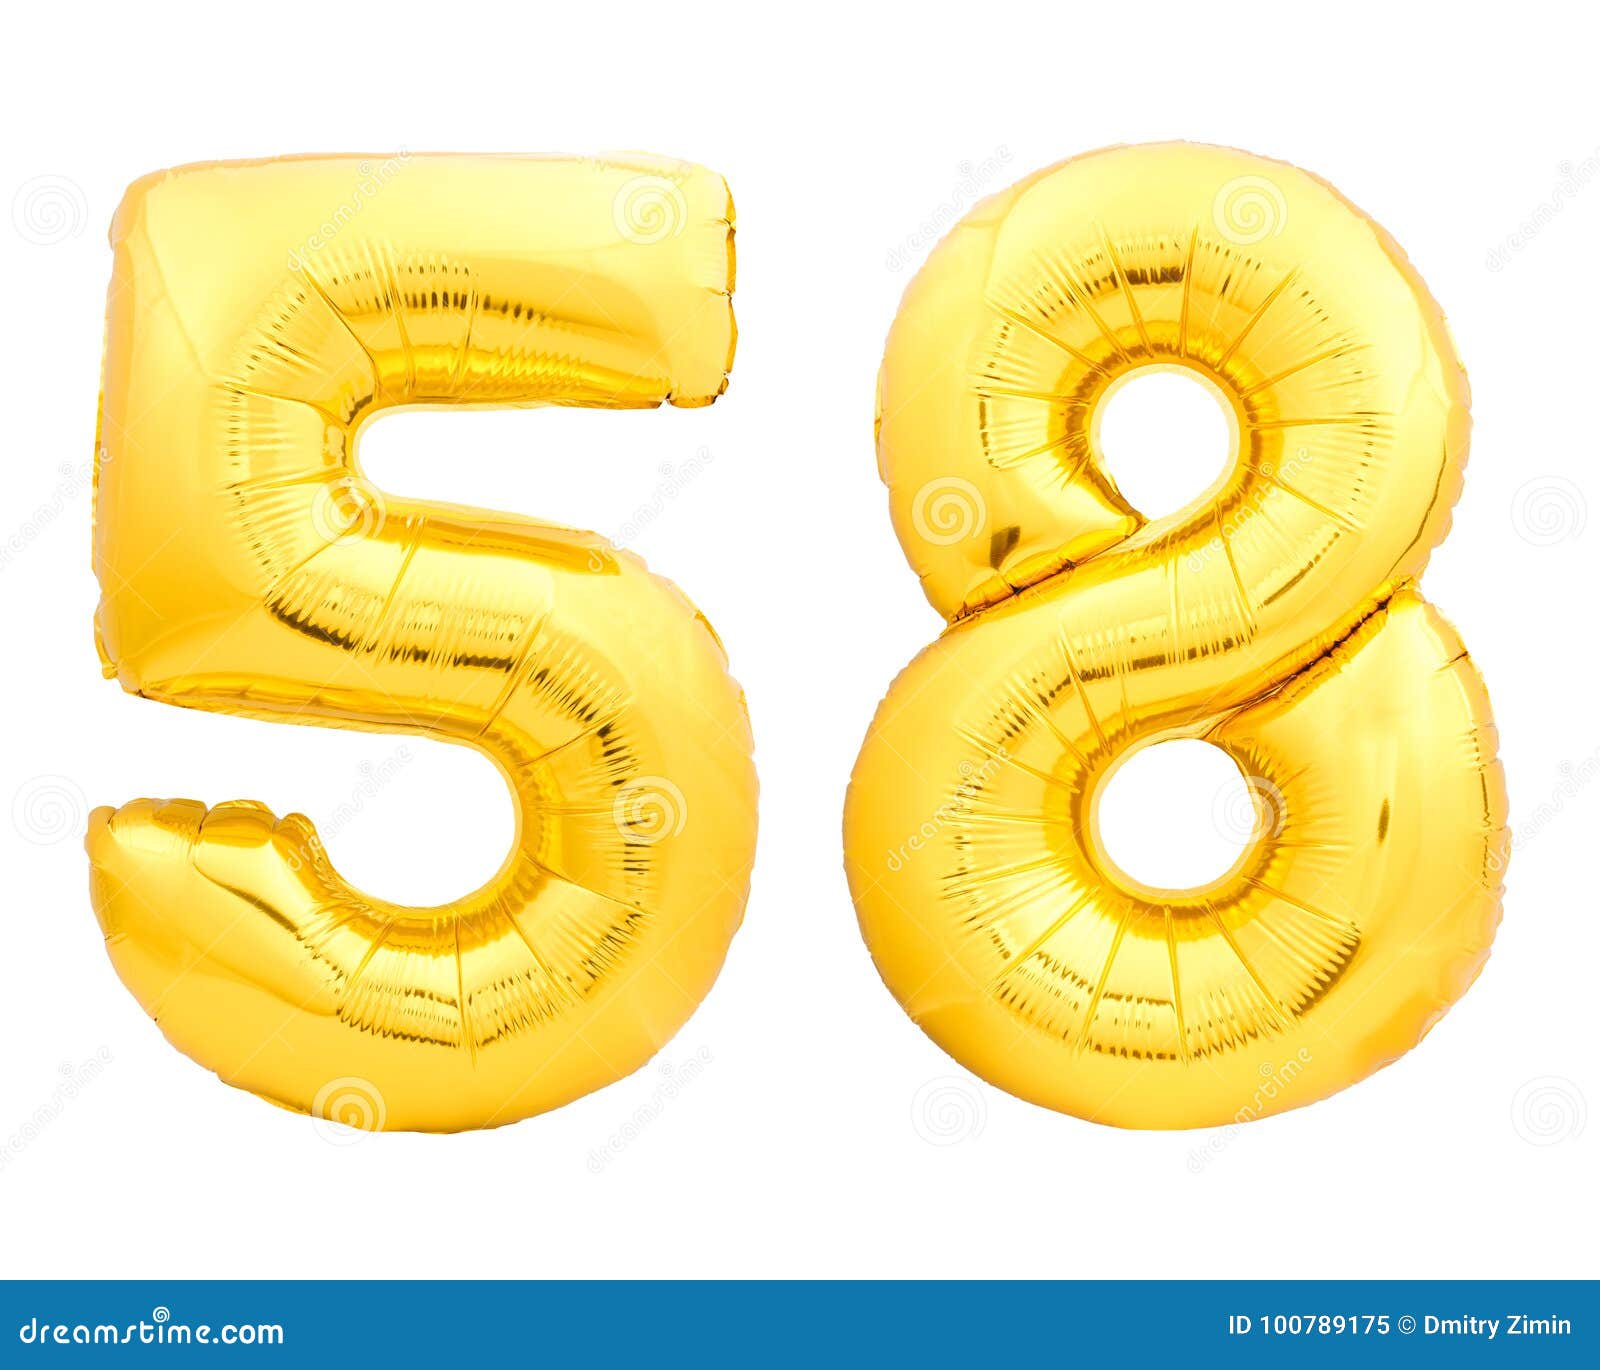 Golden Number 58 Fifty Eight Made Of Inflatable Balloon Stock Image ...